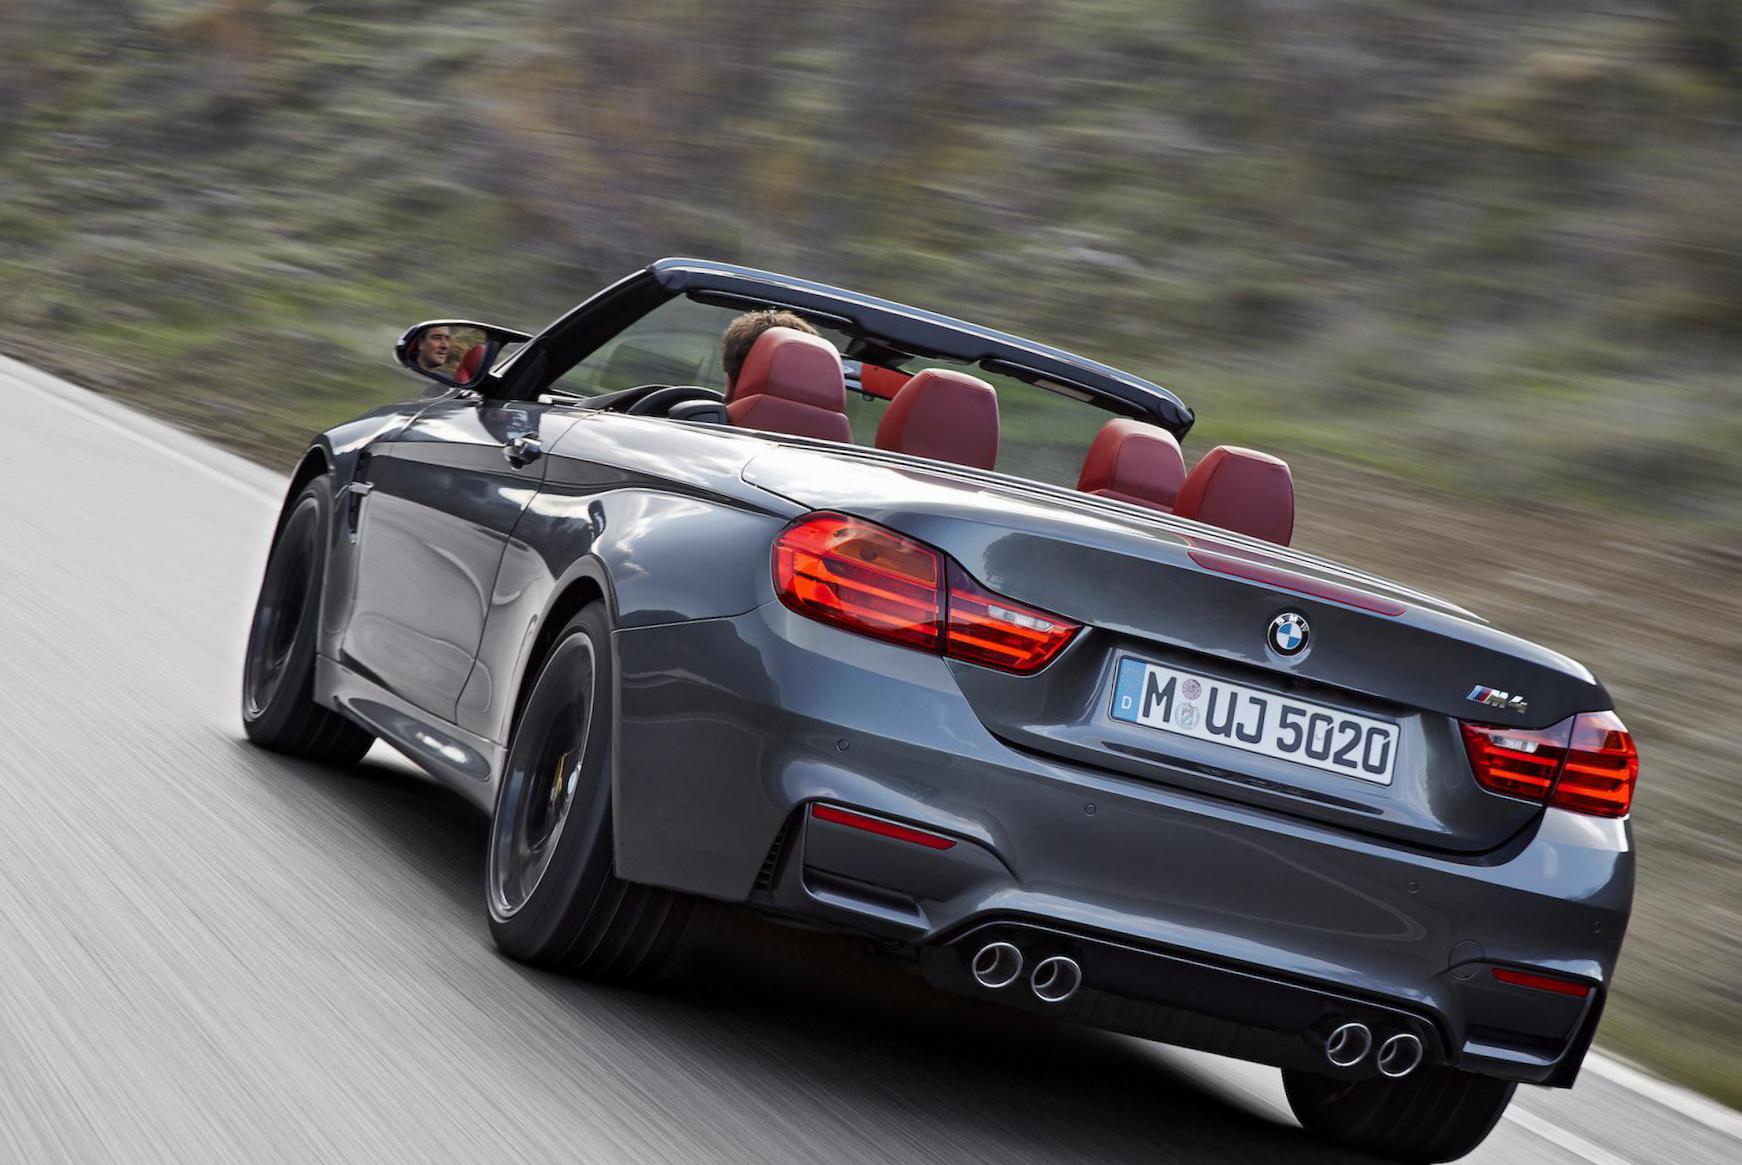 BMW M4 Convertible (F83) for sale 2010